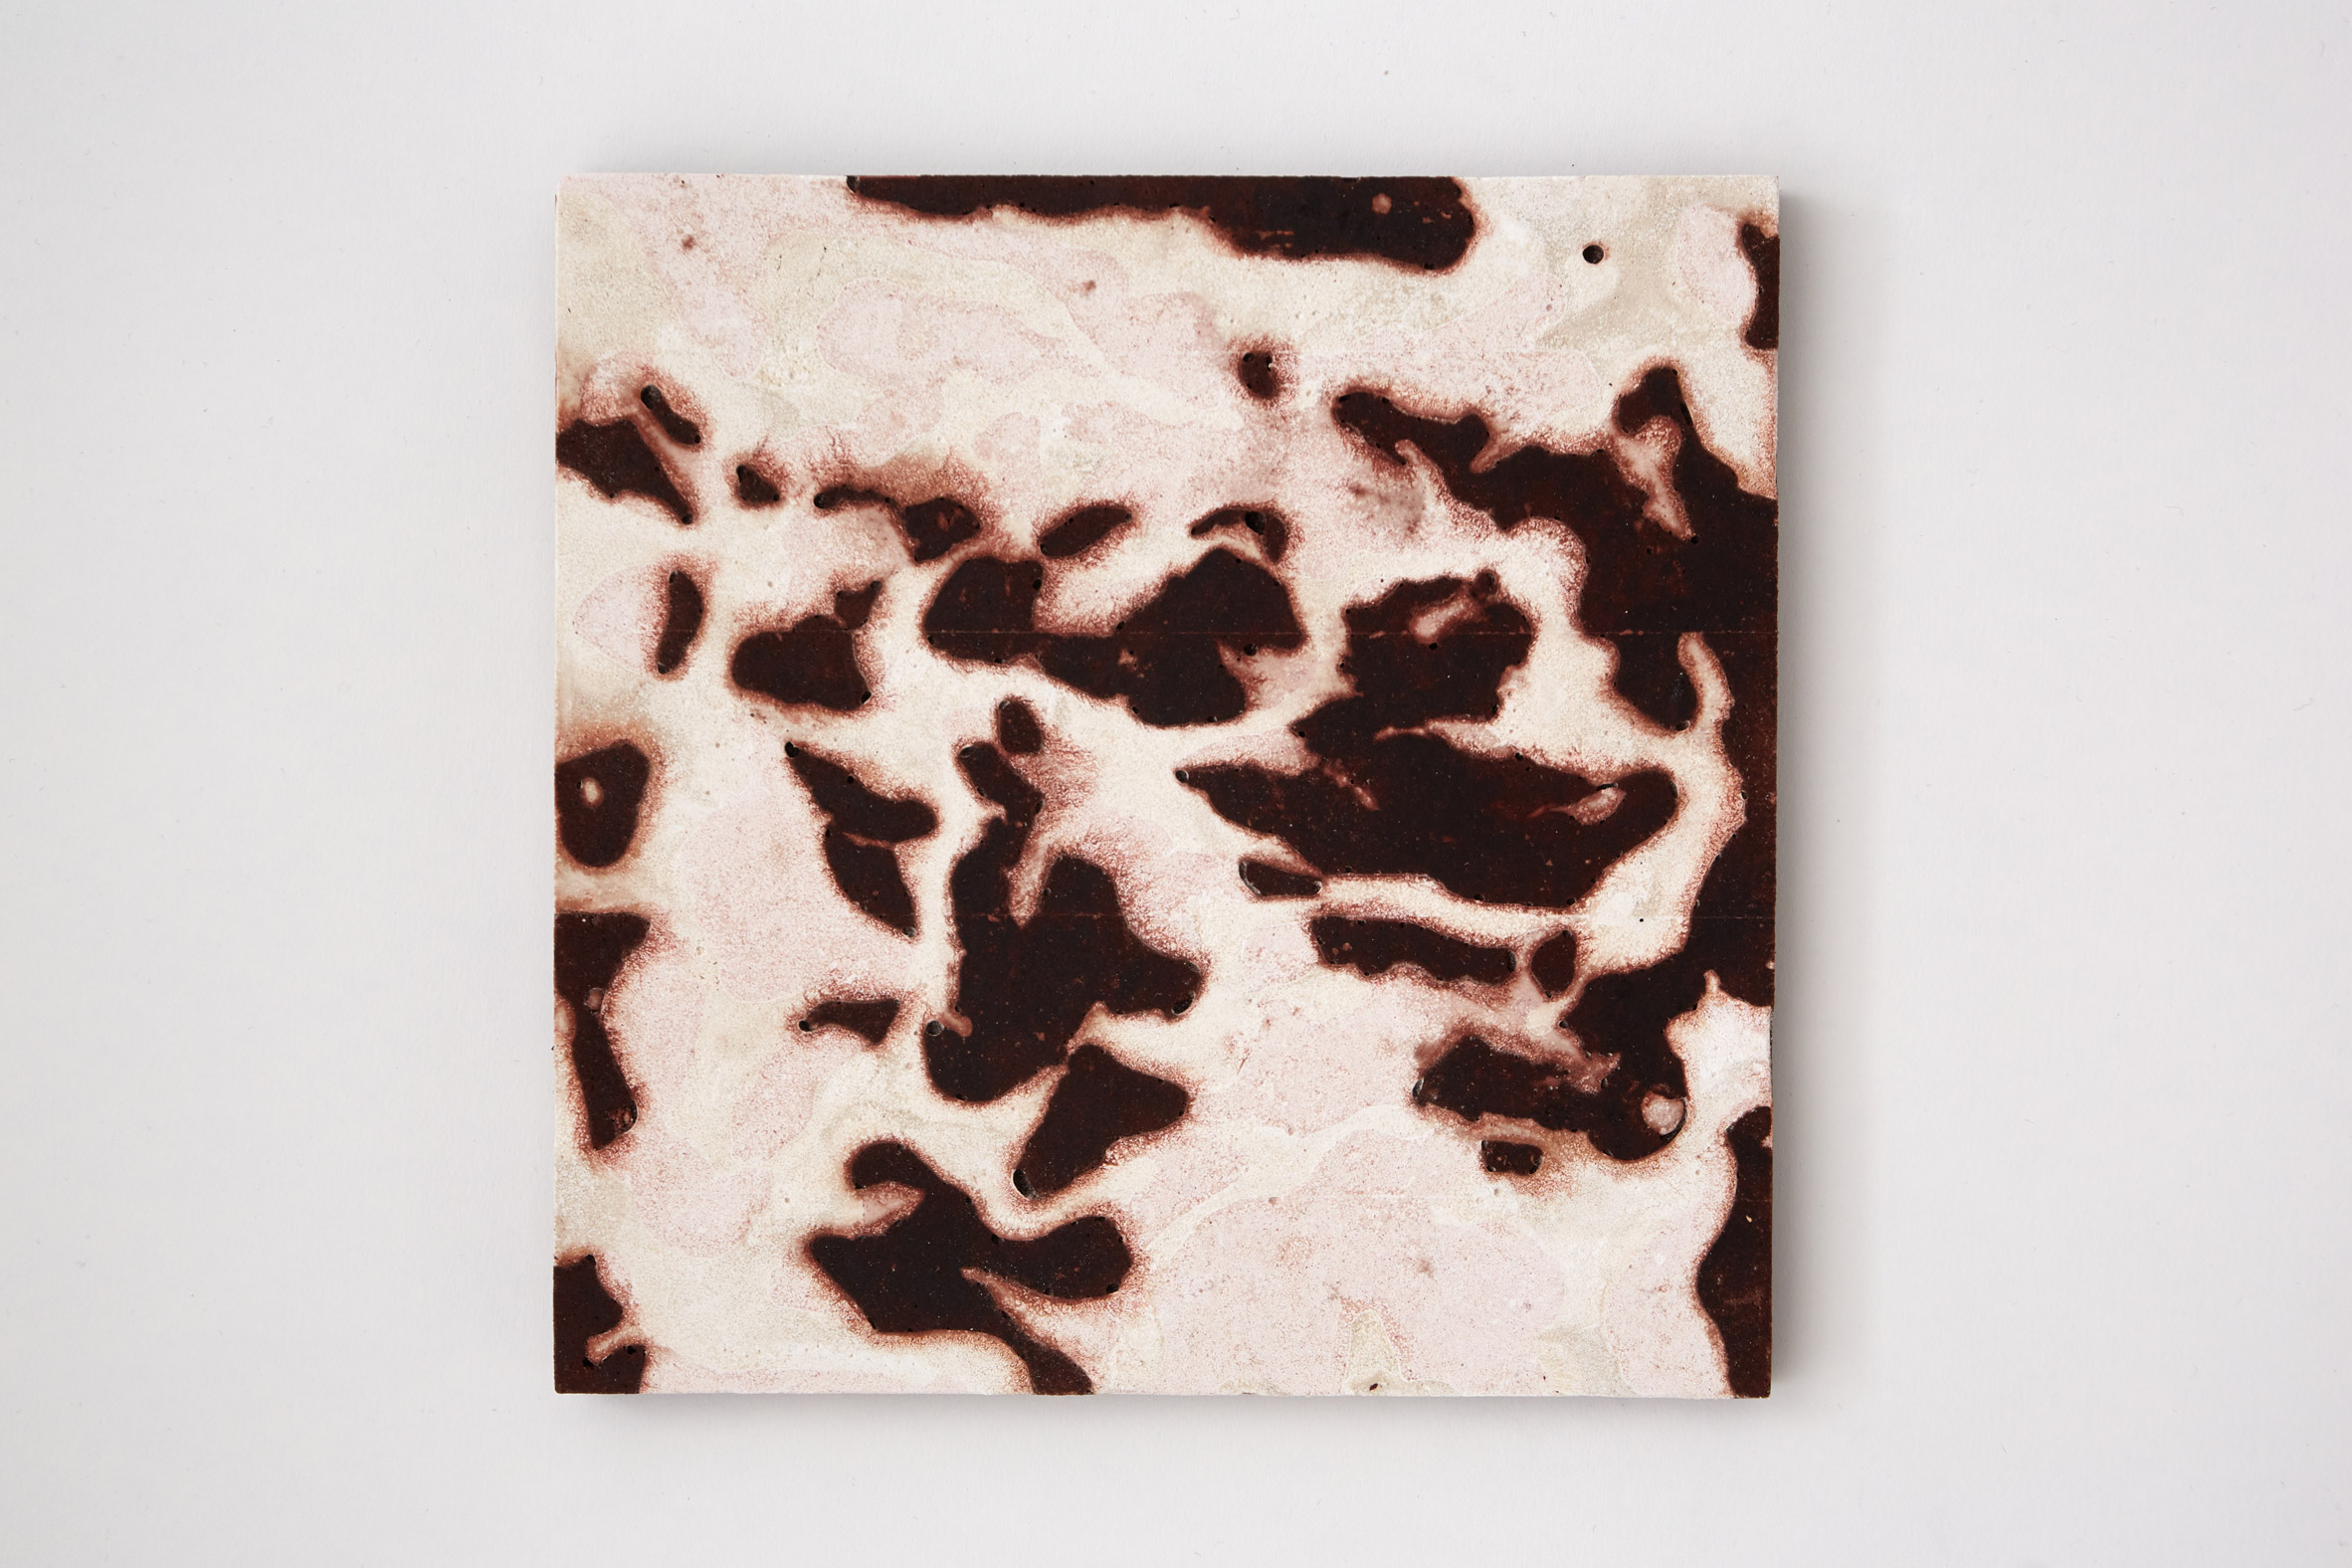 Marbled tile made from invasive species by Irene Roca Moracia and Brigitte Kock